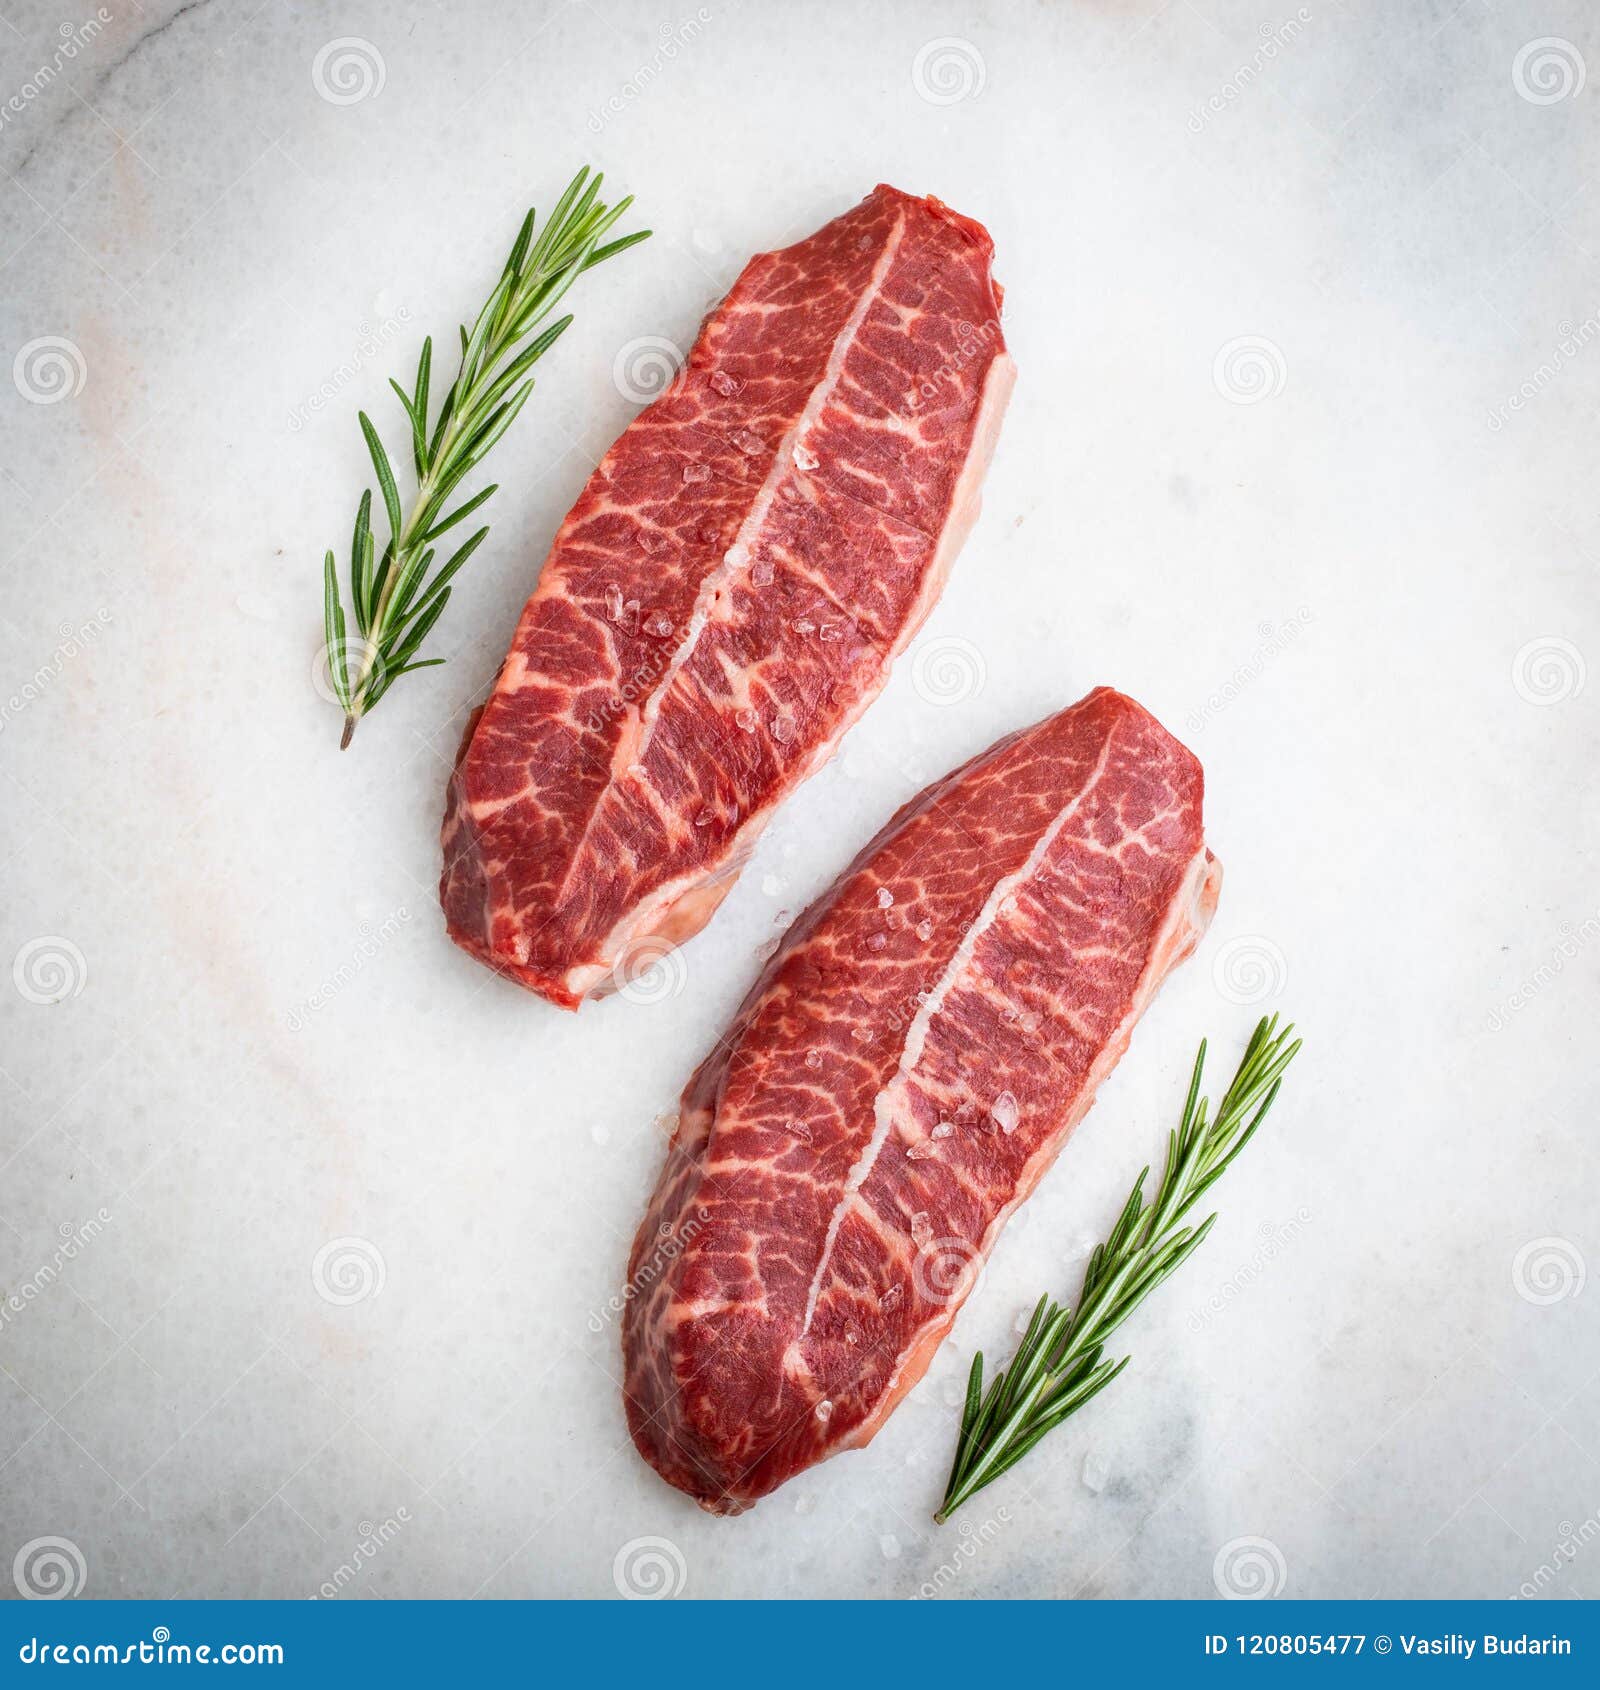 raw fresh meat top blade steaks on light background. top view